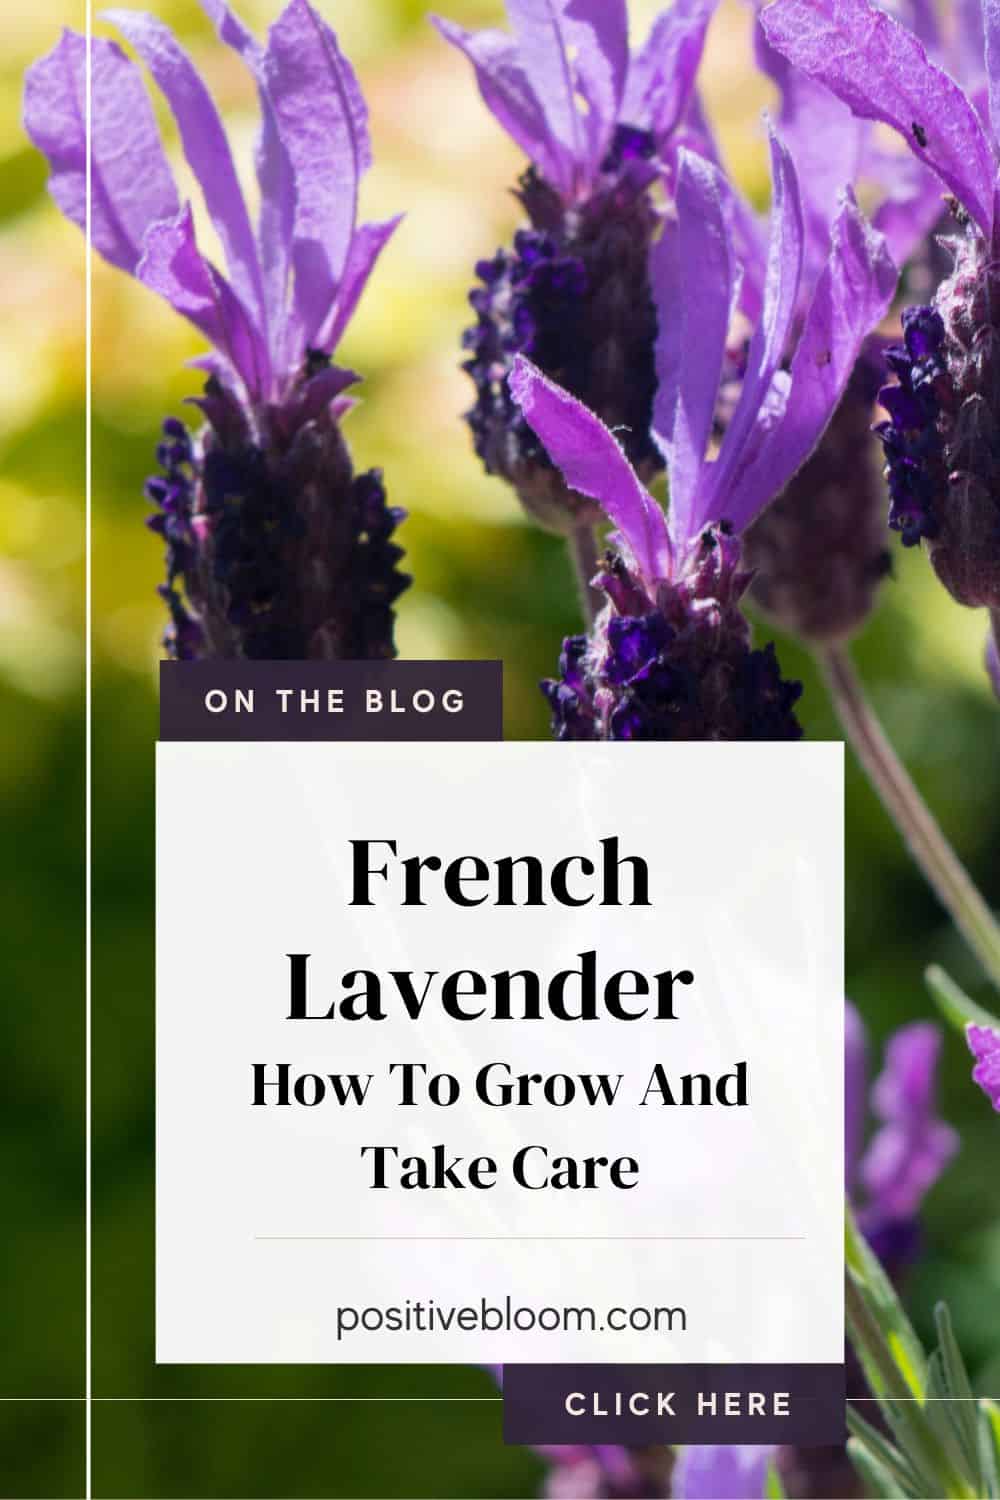 How To Grow And Take Care Of French Lavender Pinterest